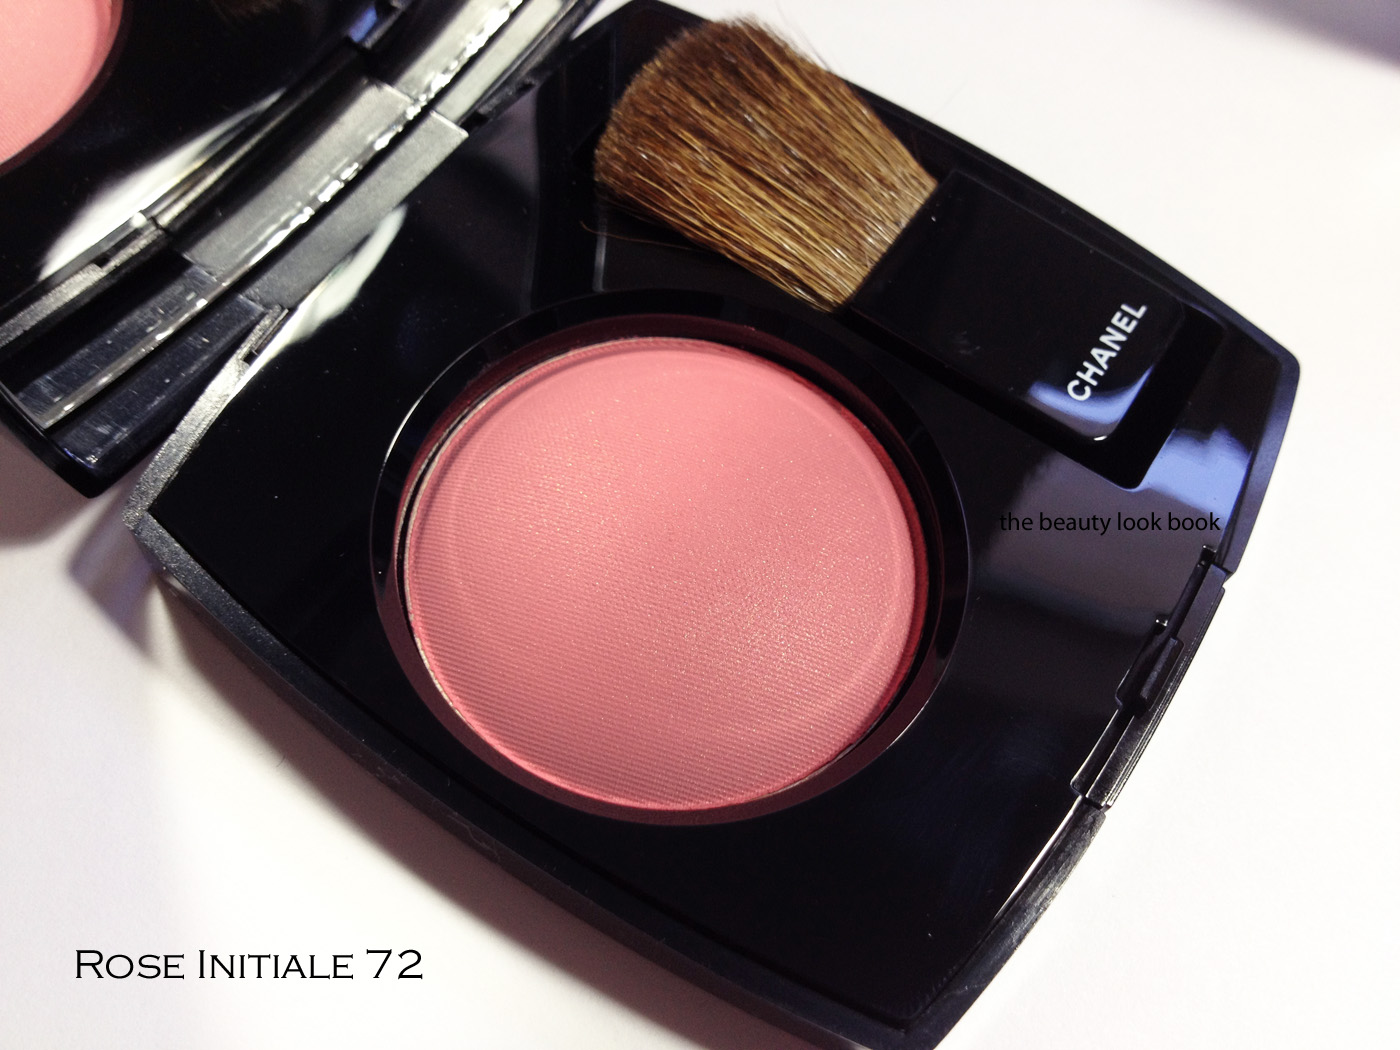 Chanel Rose Initiale Powder Blush #72 - Fall 2012 - The Beauty Look Book